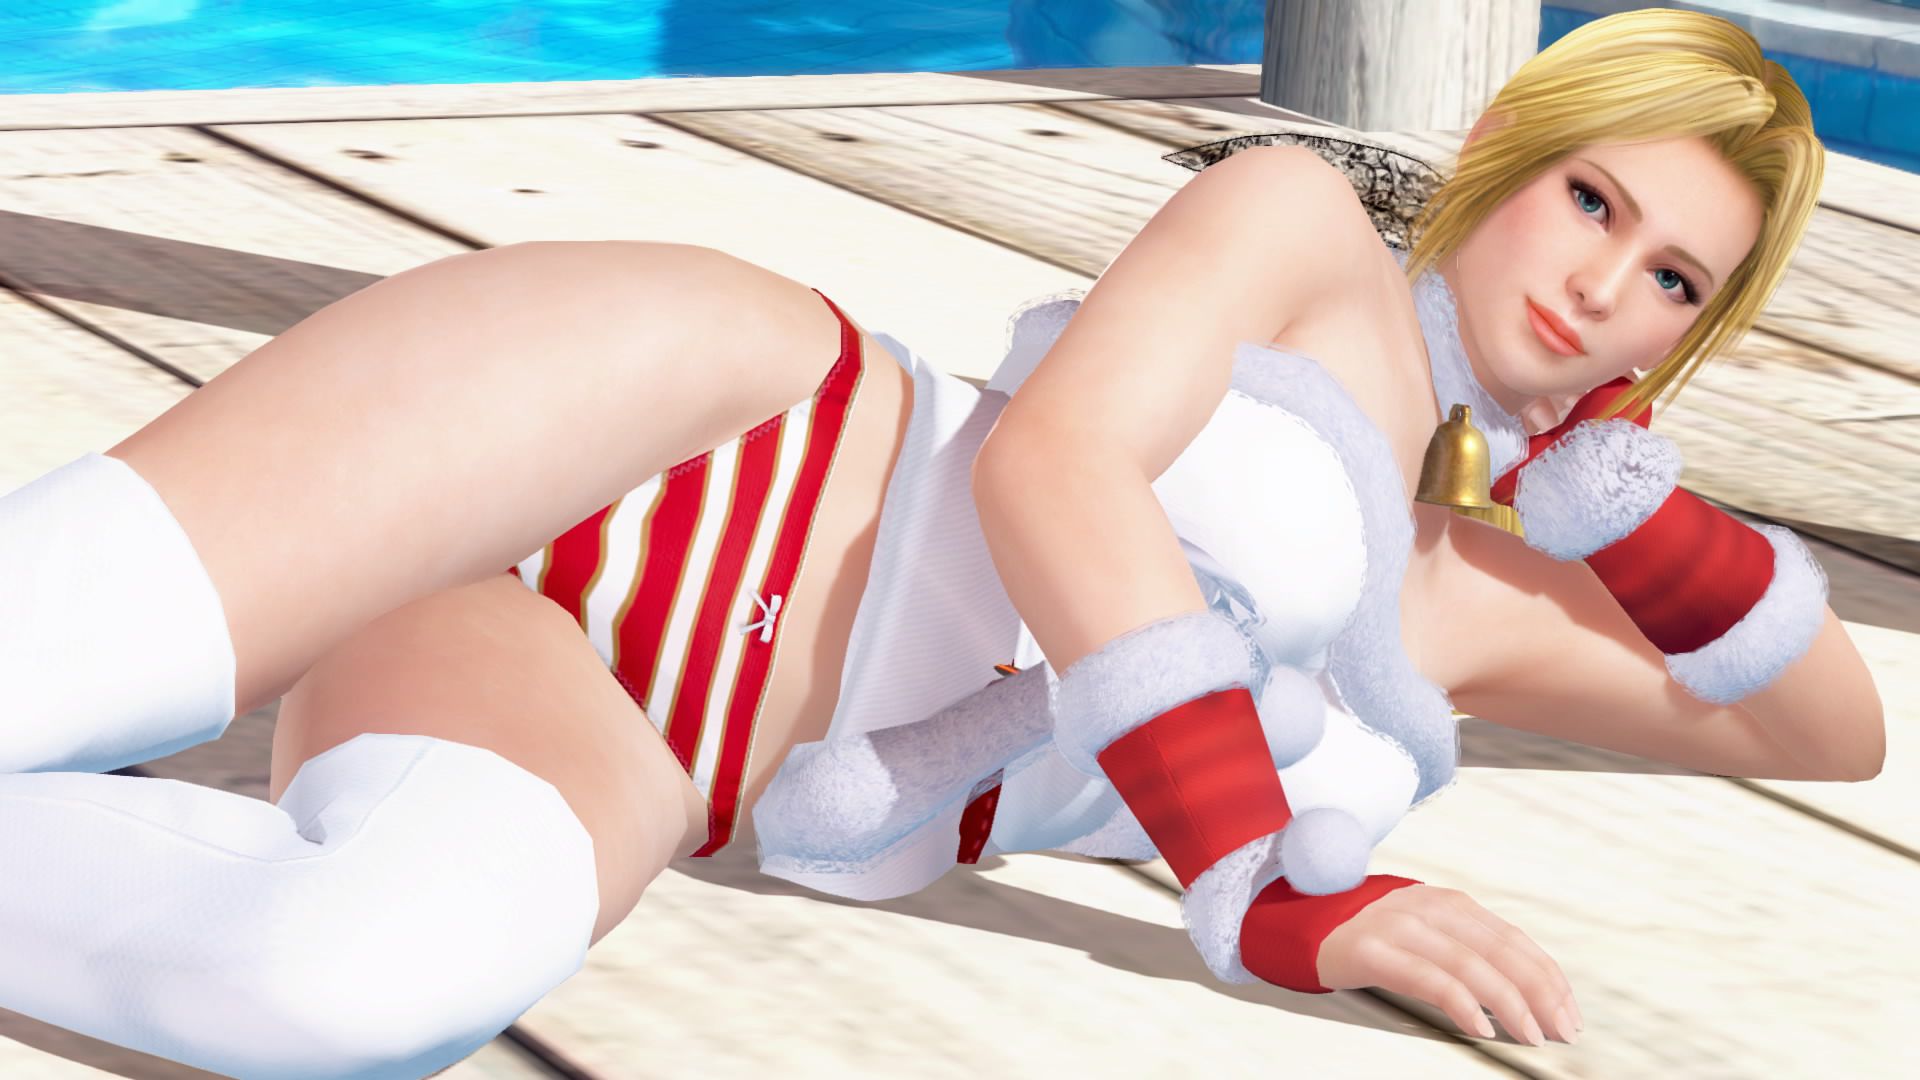 Merry Xmas from DOAX3 South Island! Photo session with new swimsuit Santa 22